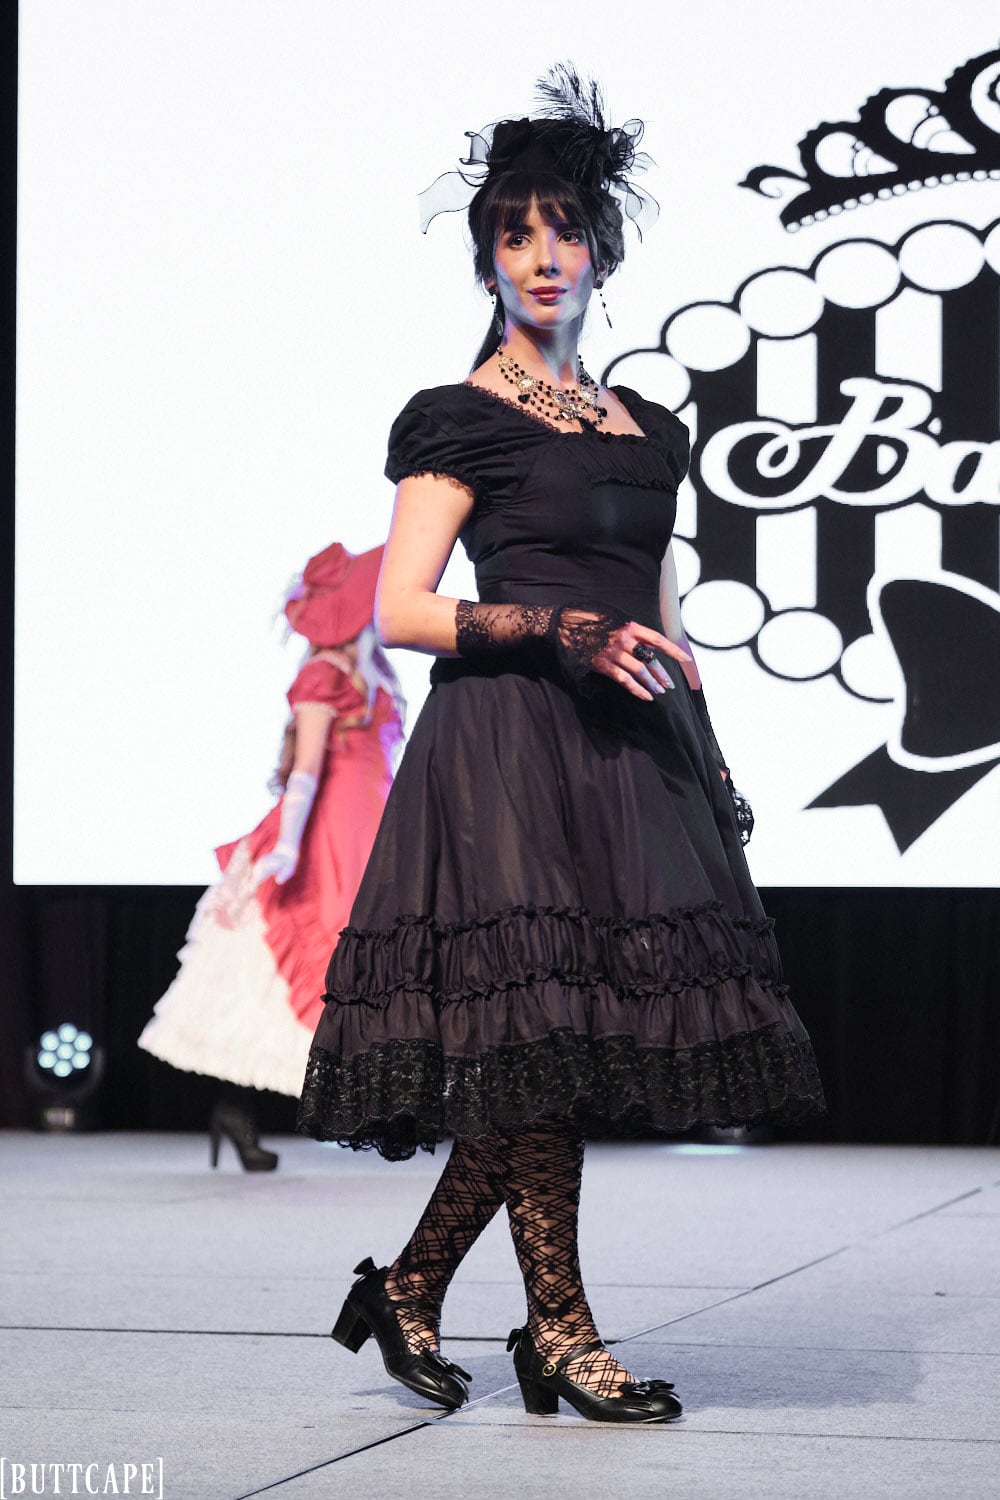 lolita model wearing all black classic dress posing looking at audience.